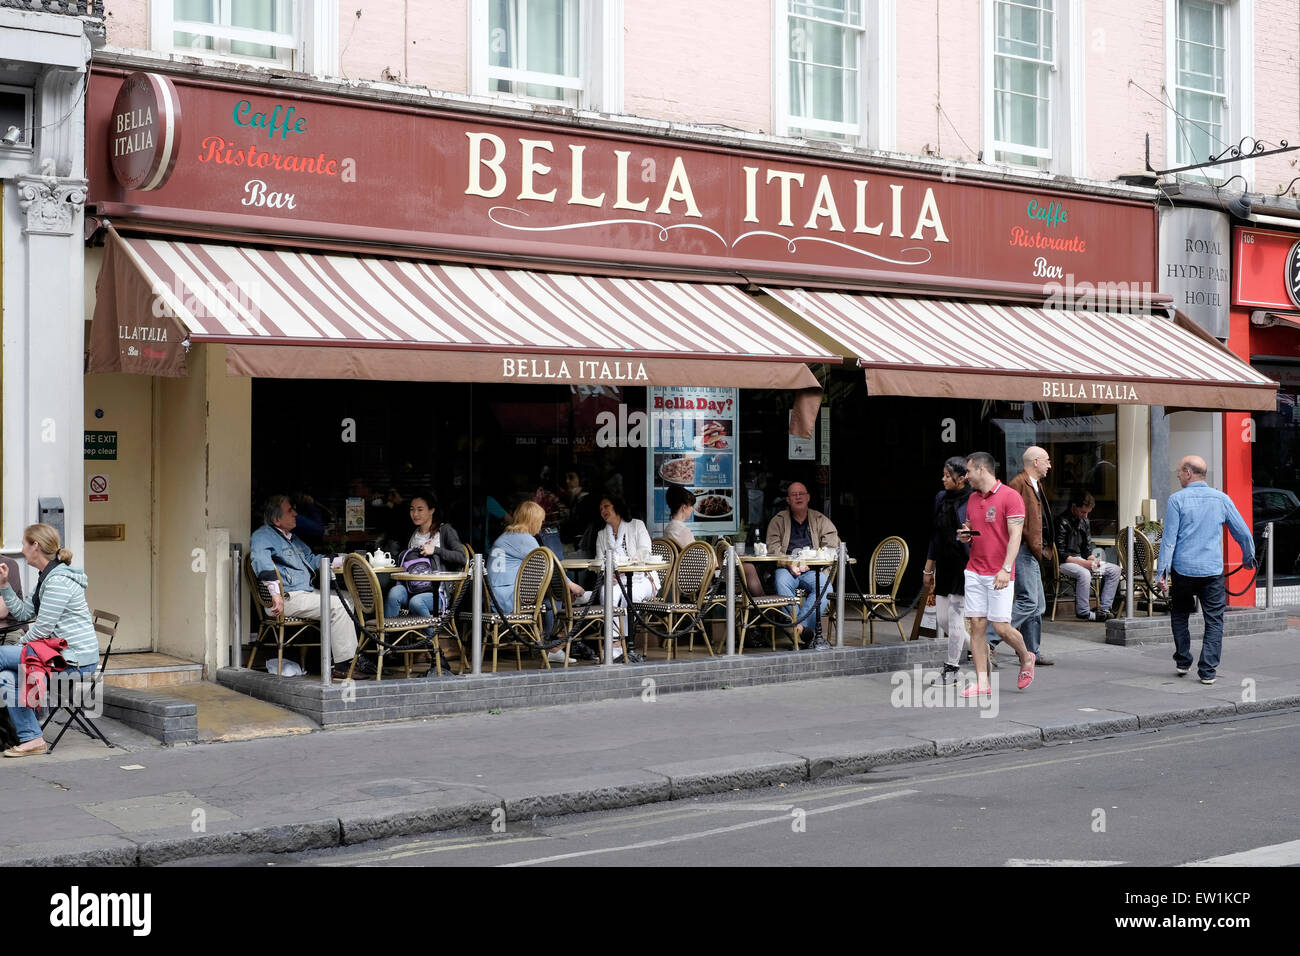 A general view of Bella Italia restaurant in Queensway, London Stock Photo